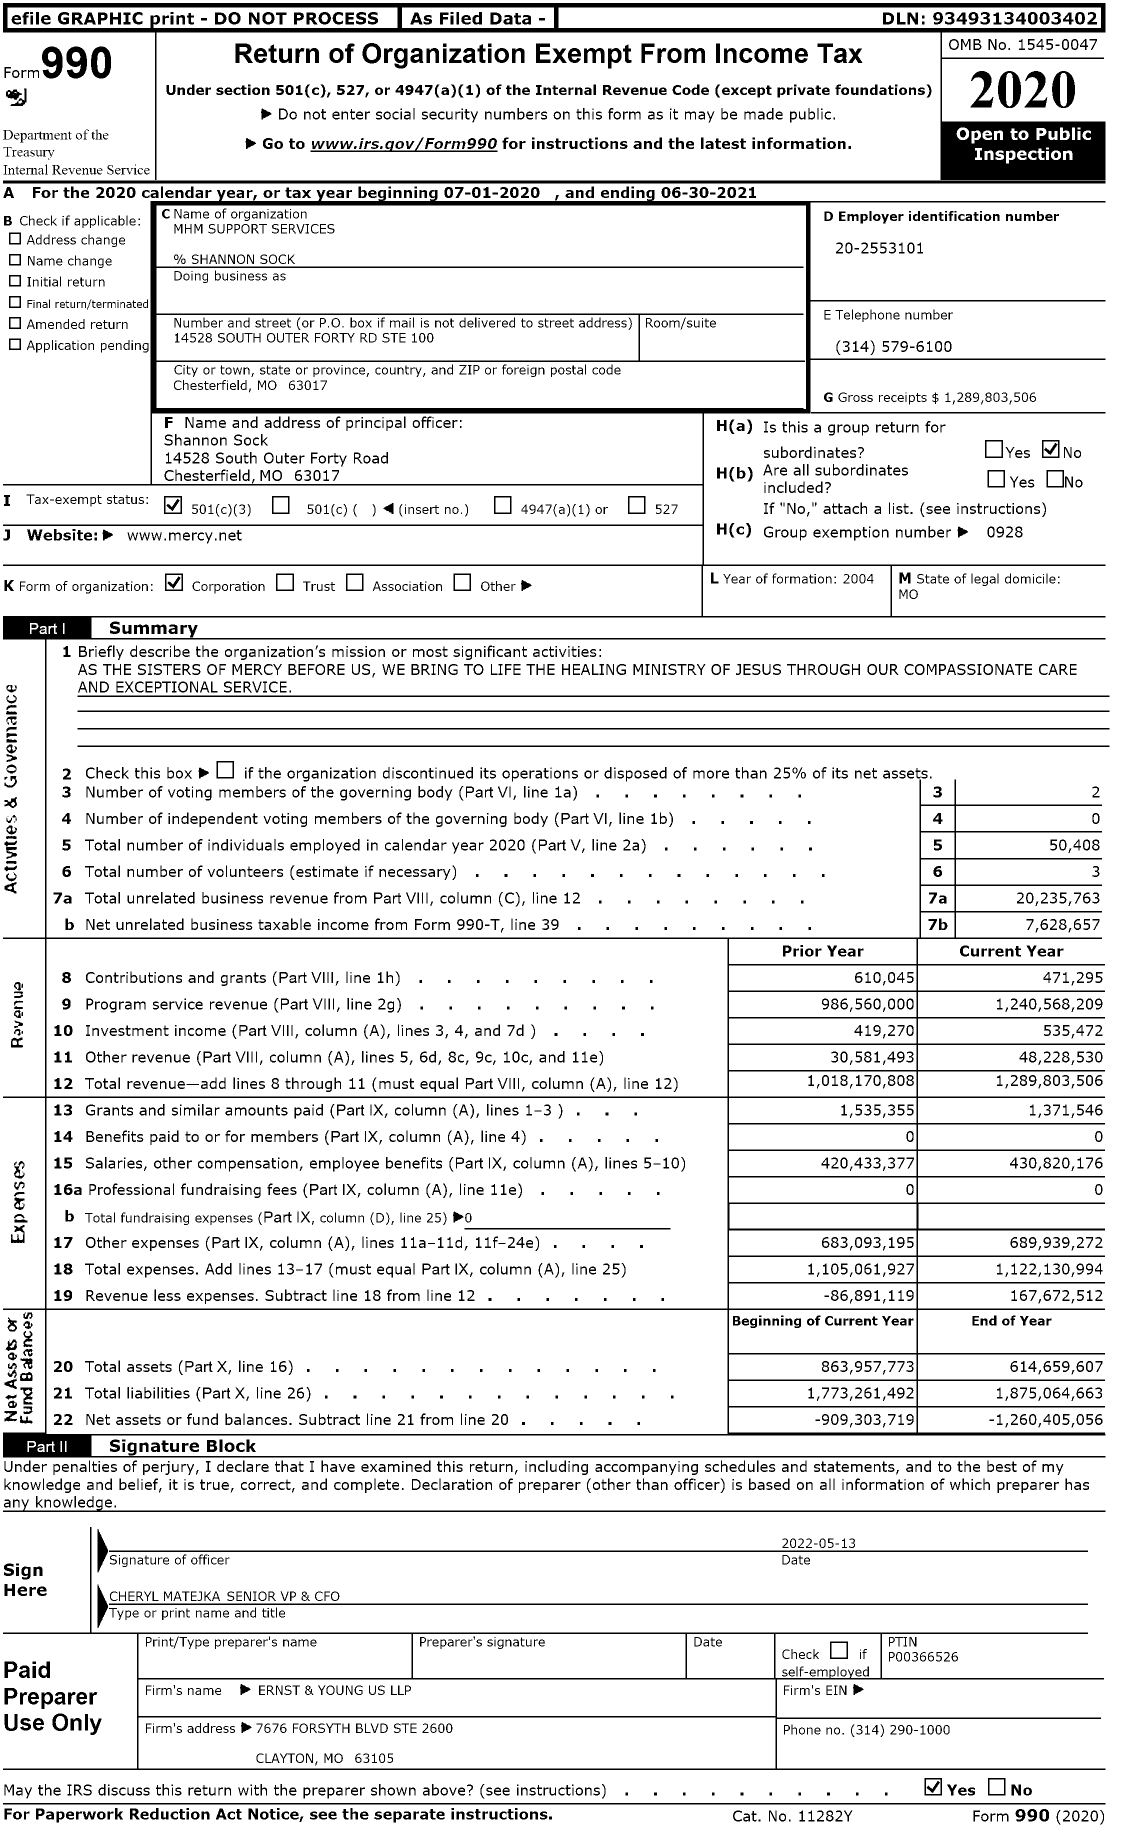 Image of first page of 2020 Form 990 for MHM Support Services